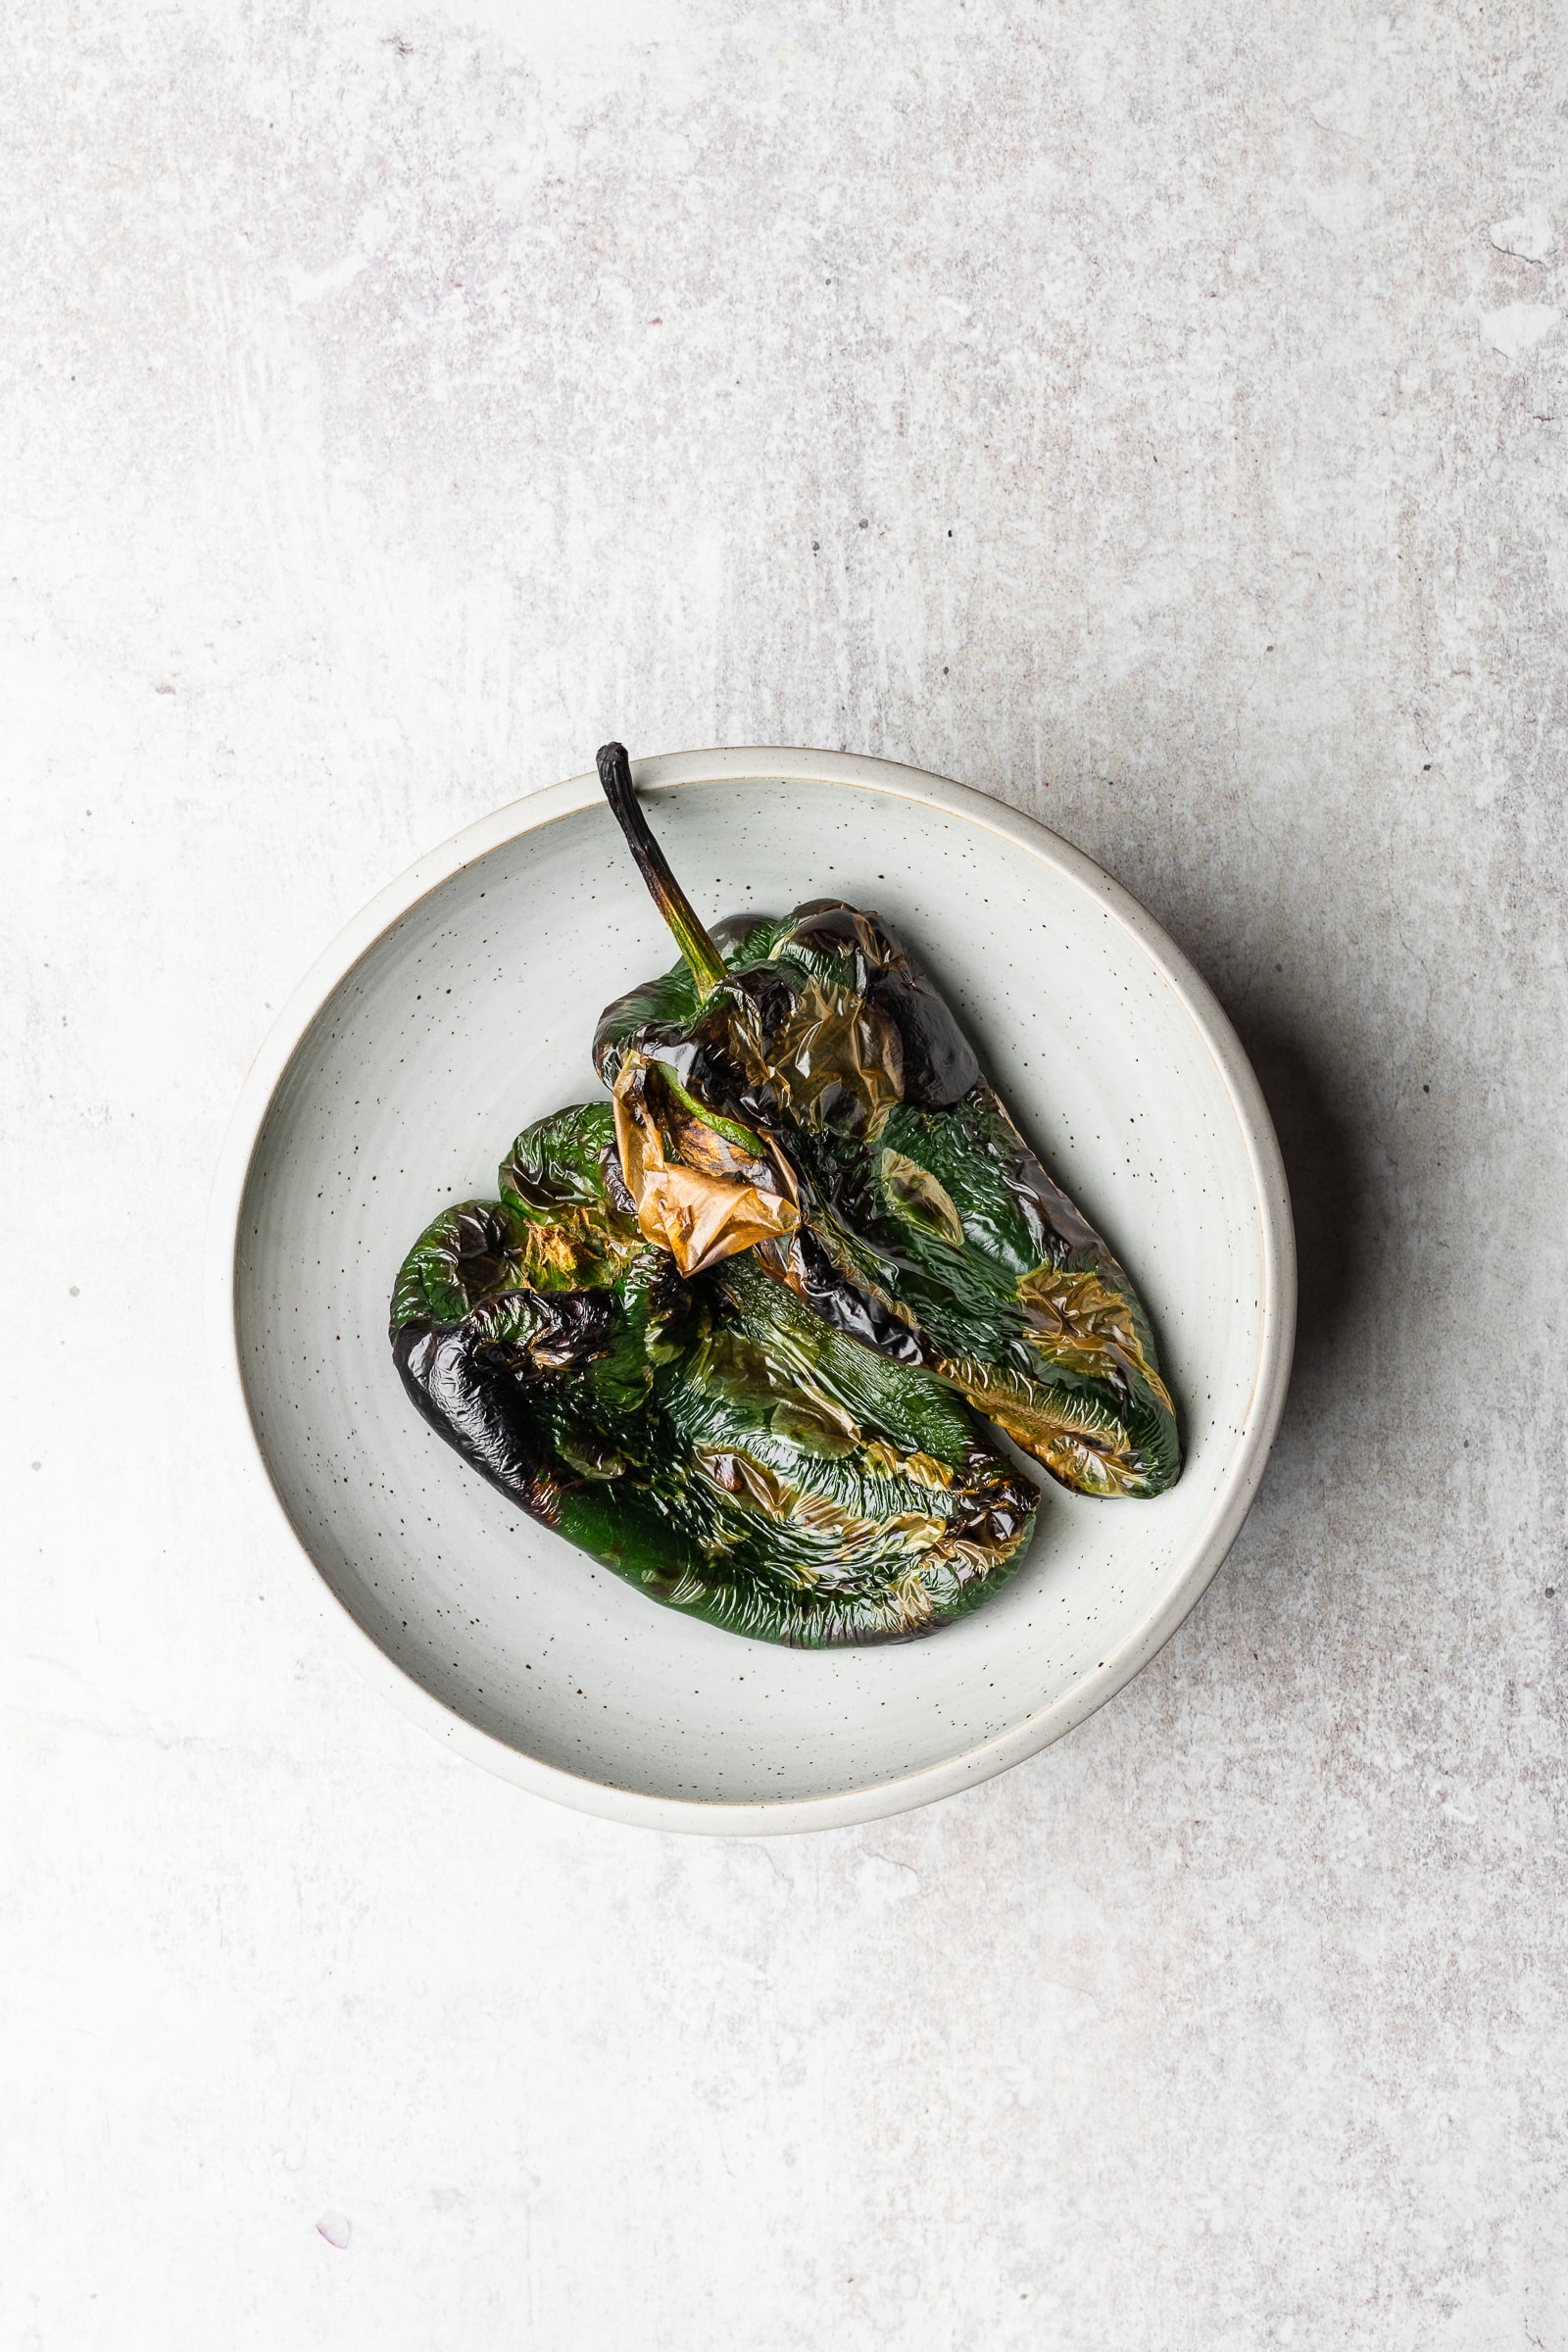 Roasted poblano peppers.